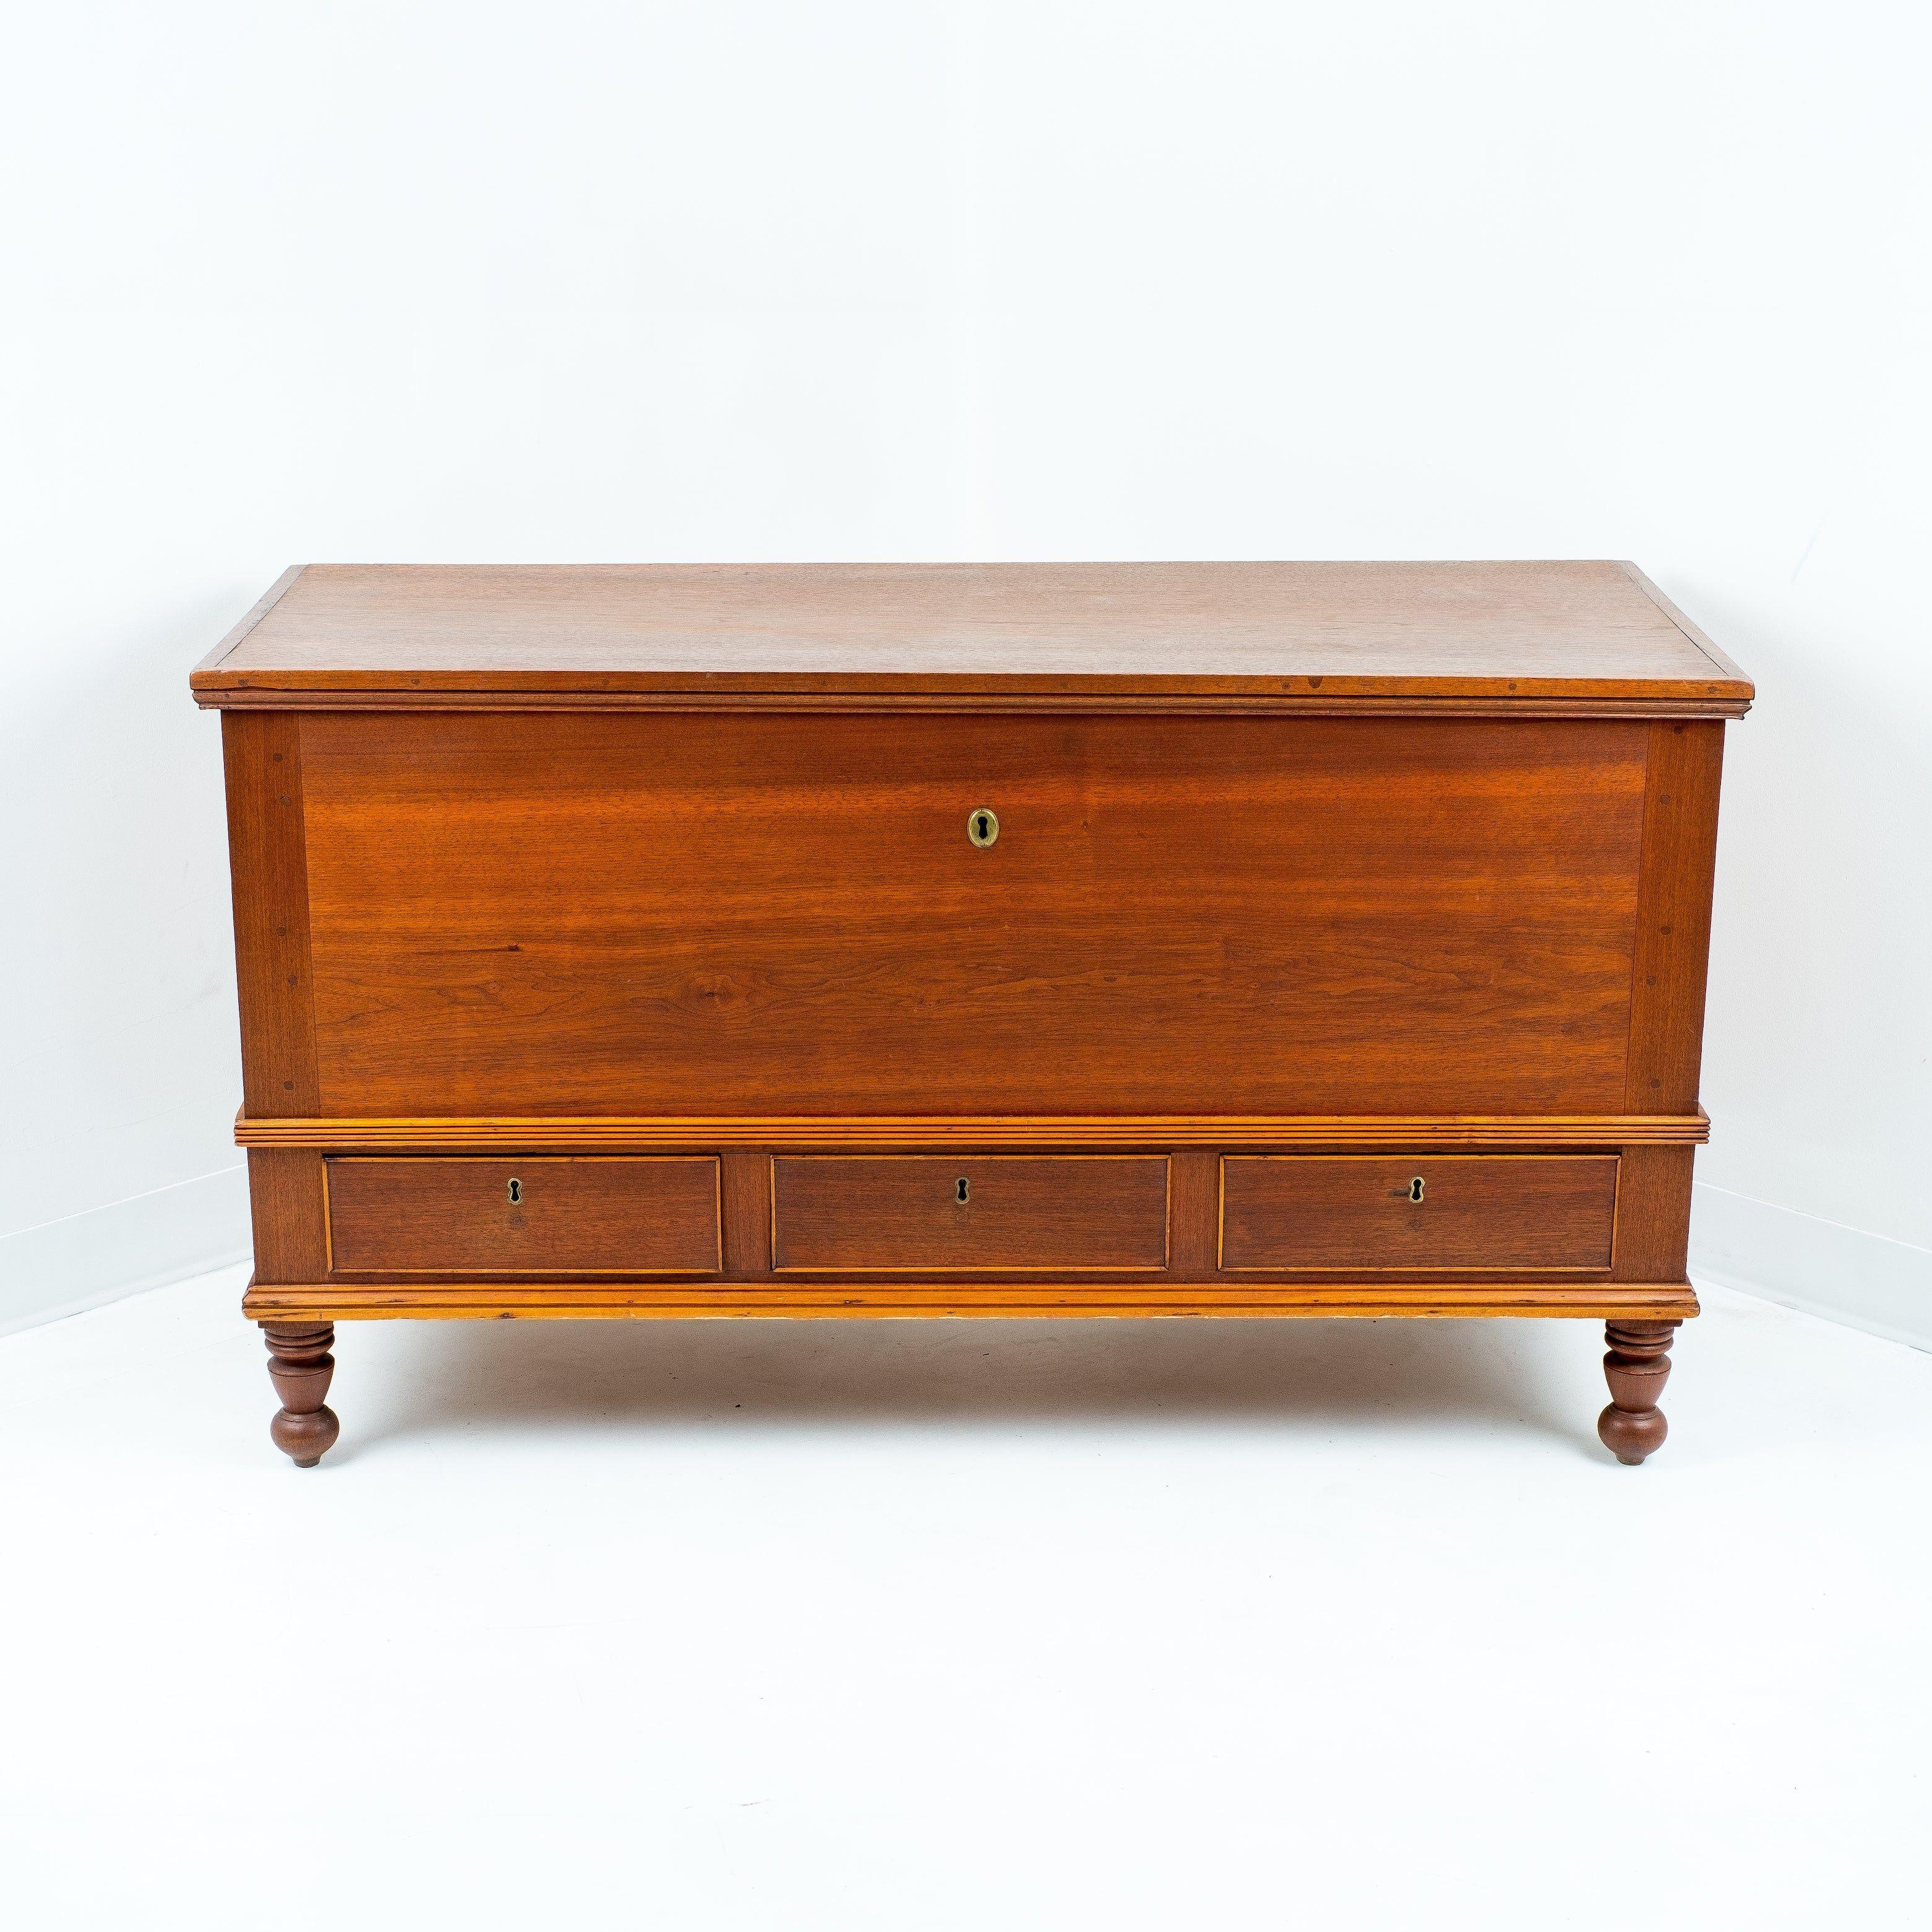 American black walnut dower chest over three divided drawers. The chest features post and panel construction with the corner posts terminating in turned feet. The hinged lift top reveals an interior fitted with till, and the top has an applied rim